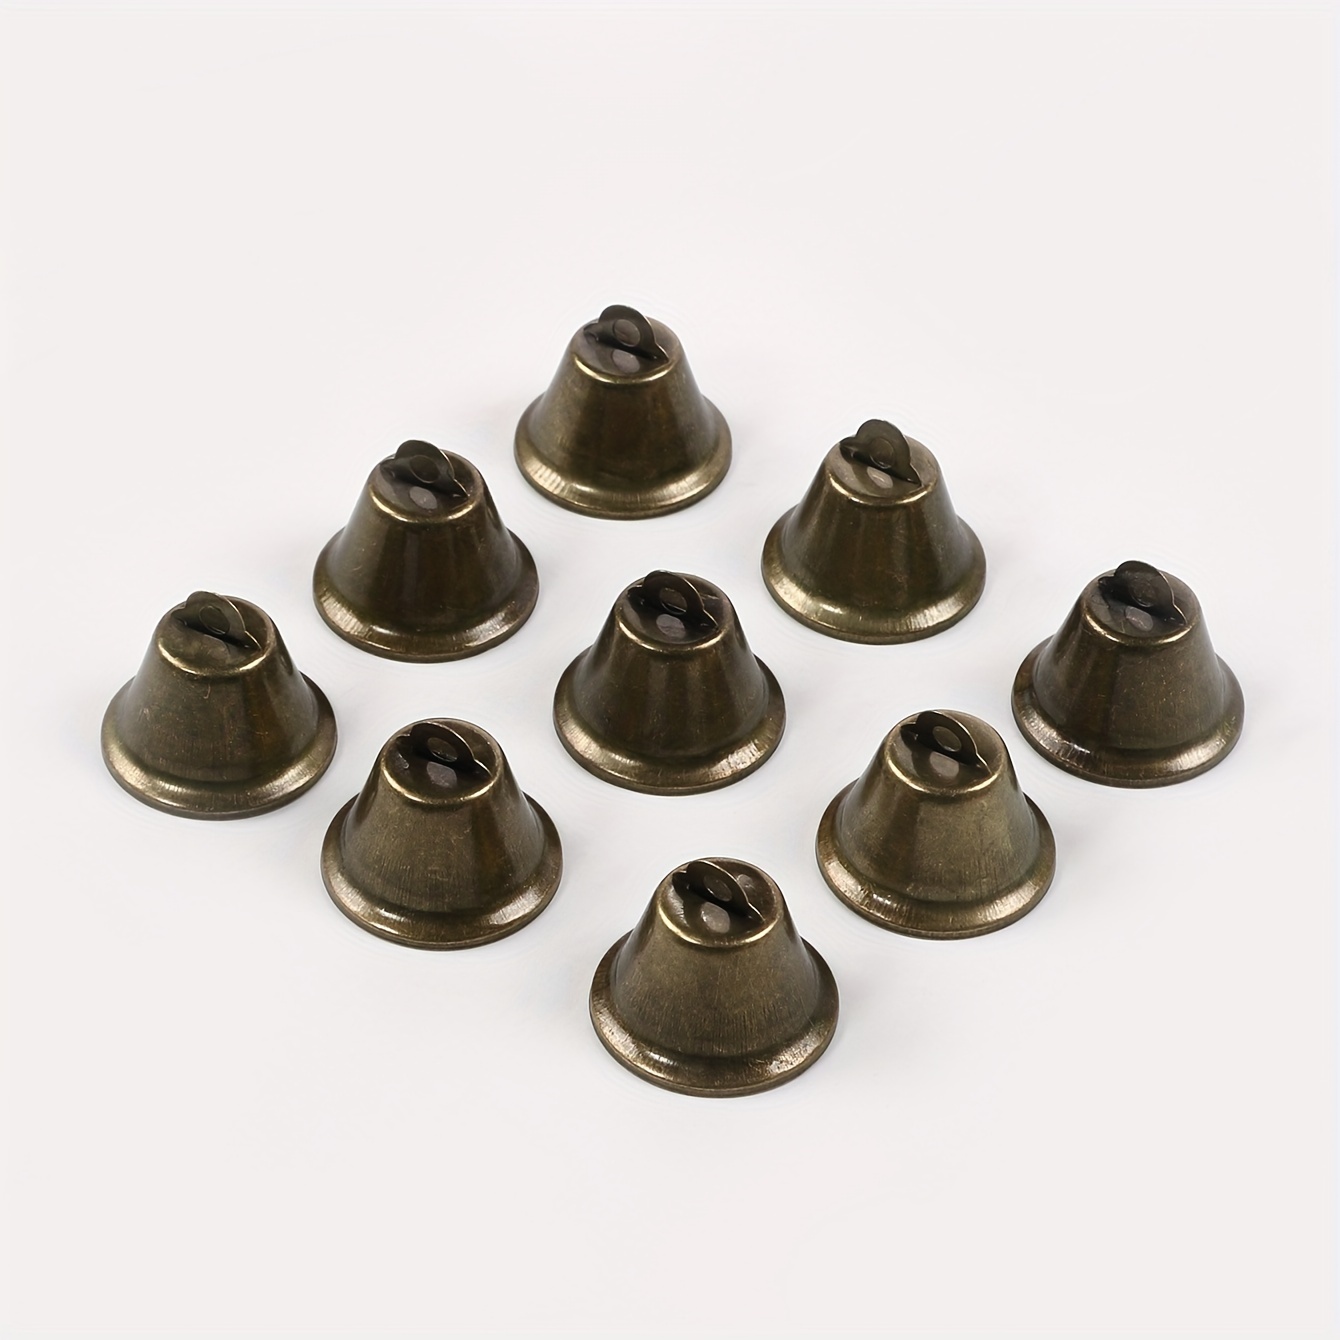 

16pcs Vintage Bronze Bell For Dog Doorbell And Bedpan Training, Burglary, Making Wind Chimes, Christmas Bells